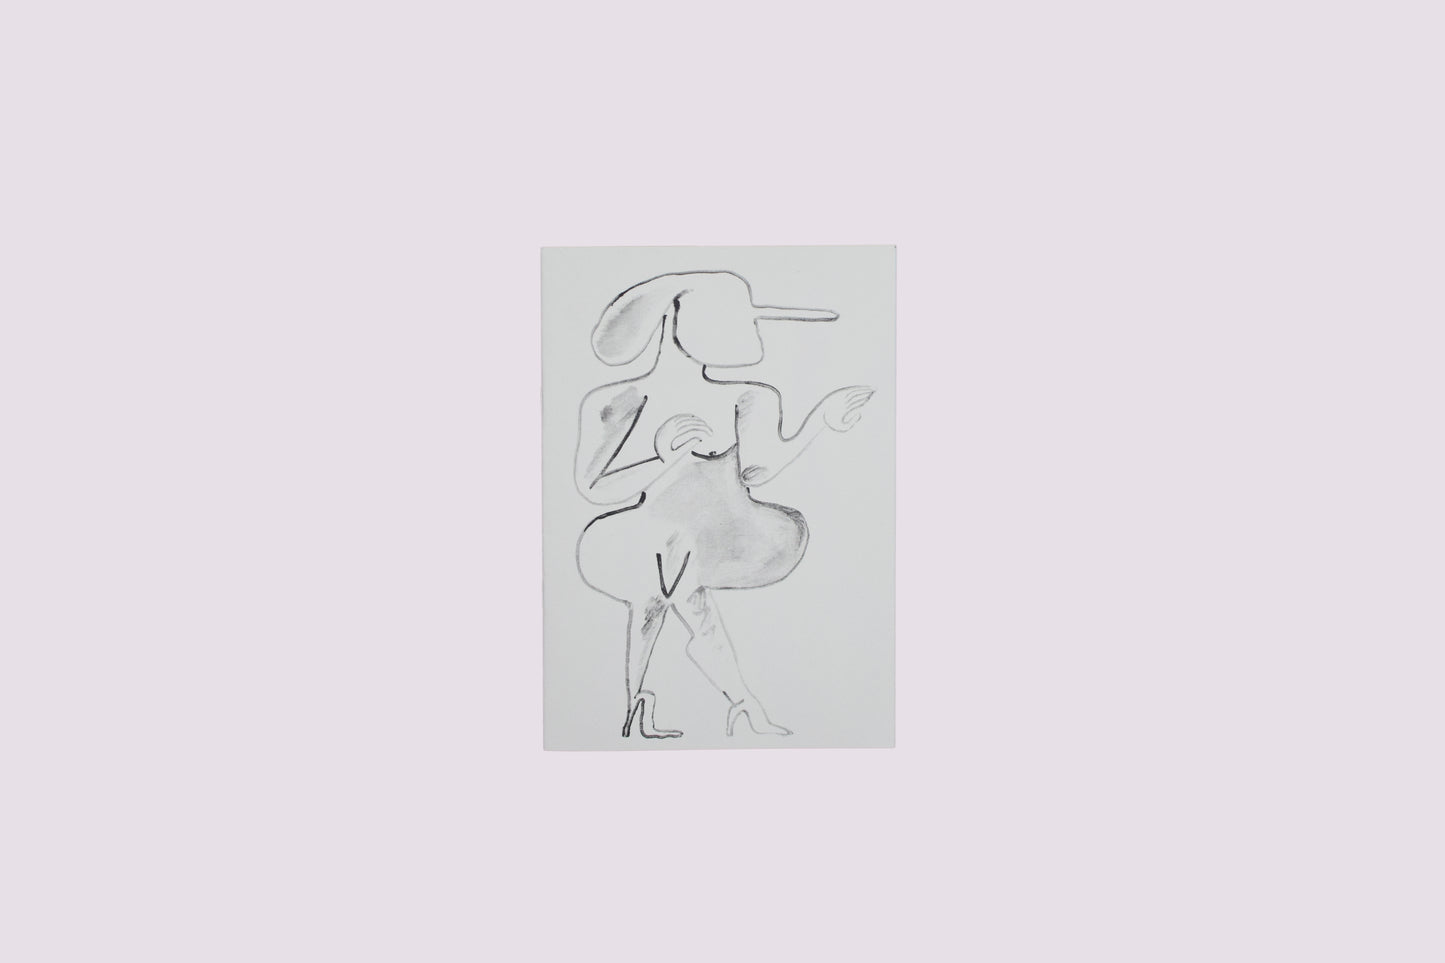 Baloney Poppers/Devendra Banhart published by Nieves